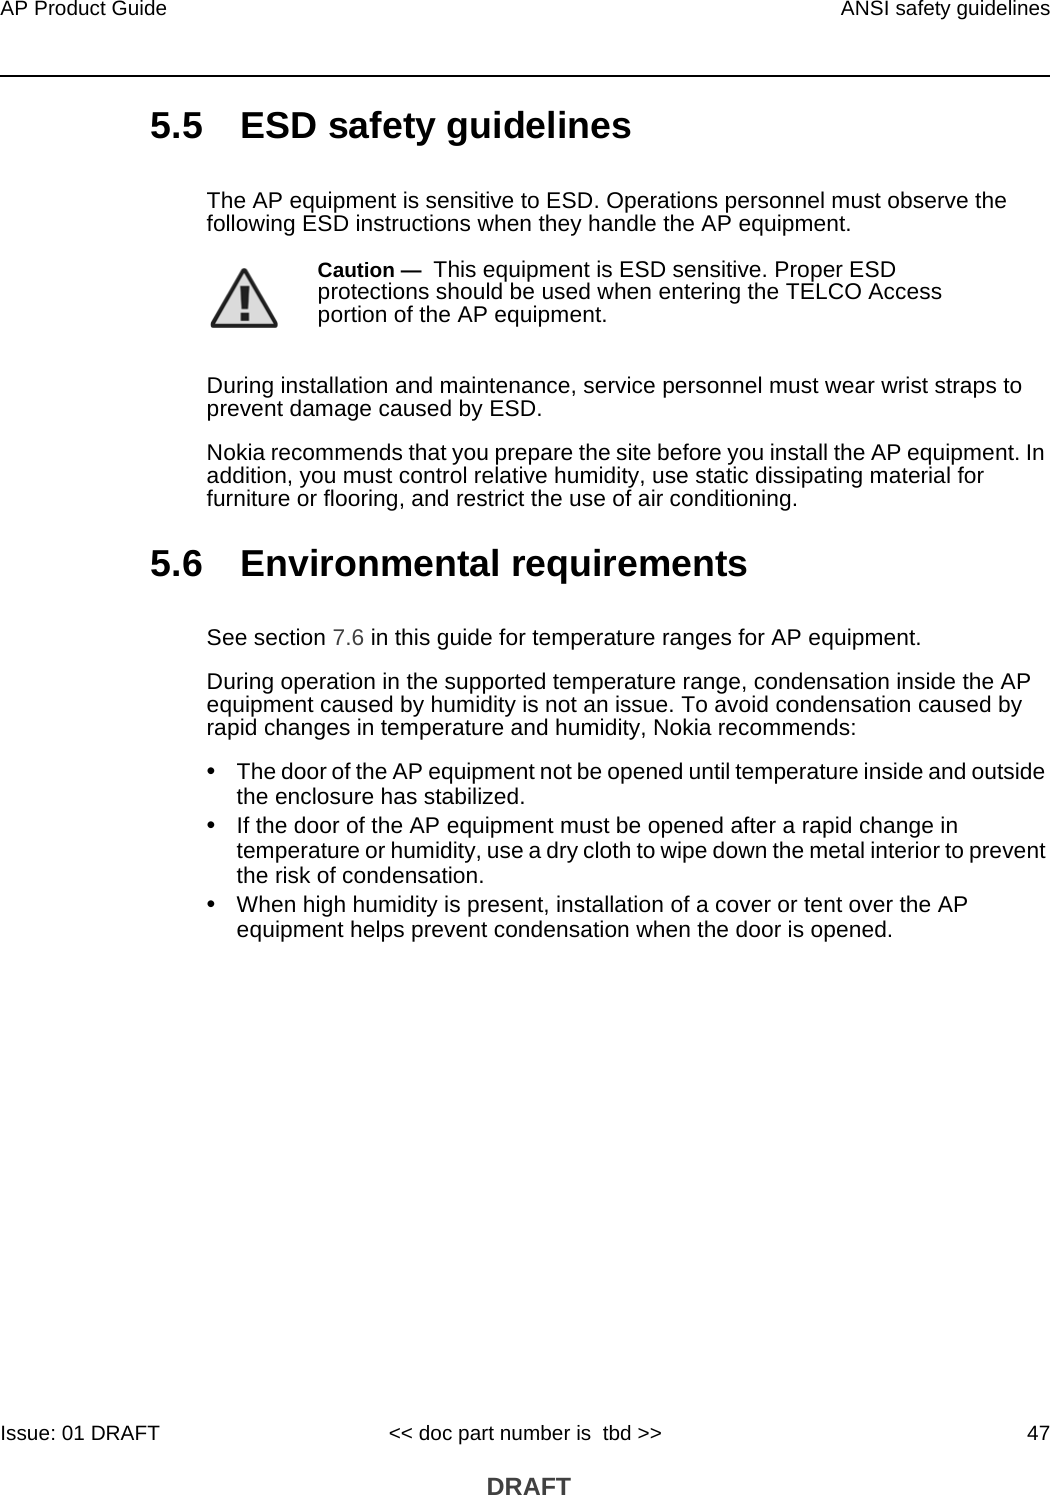 AP Product Guide ANSI safety guidelinesIssue: 01 DRAFT &lt;&lt; doc part number is  tbd &gt;&gt; 47 DRAFT5.5 ESD safety guidelinesThe AP equipment is sensitive to ESD. Operations personnel must observe the following ESD instructions when they handle the AP equipment. During installation and maintenance, service personnel must wear wrist straps to prevent damage caused by ESD.Nokia recommends that you prepare the site before you install the AP equipment. In addition, you must control relative humidity, use static dissipating material for furniture or flooring, and restrict the use of air conditioning.5.6 Environmental requirementsSee section 7.6 in this guide for temperature ranges for AP equipment. During operation in the supported temperature range, condensation inside the AP equipment caused by humidity is not an issue. To avoid condensation caused by rapid changes in temperature and humidity, Nokia recommends:•The door of the AP equipment not be opened until temperature inside and outside the enclosure has stabilized.•If the door of the AP equipment must be opened after a rapid change in temperature or humidity, use a dry cloth to wipe down the metal interior to prevent the risk of condensation.•When high humidity is present, installation of a cover or tent over the AP equipment helps prevent condensation when the door is opened.Caution —  This equipment is ESD sensitive. Proper ESD protections should be used when entering the TELCO Access portion of the AP equipment.